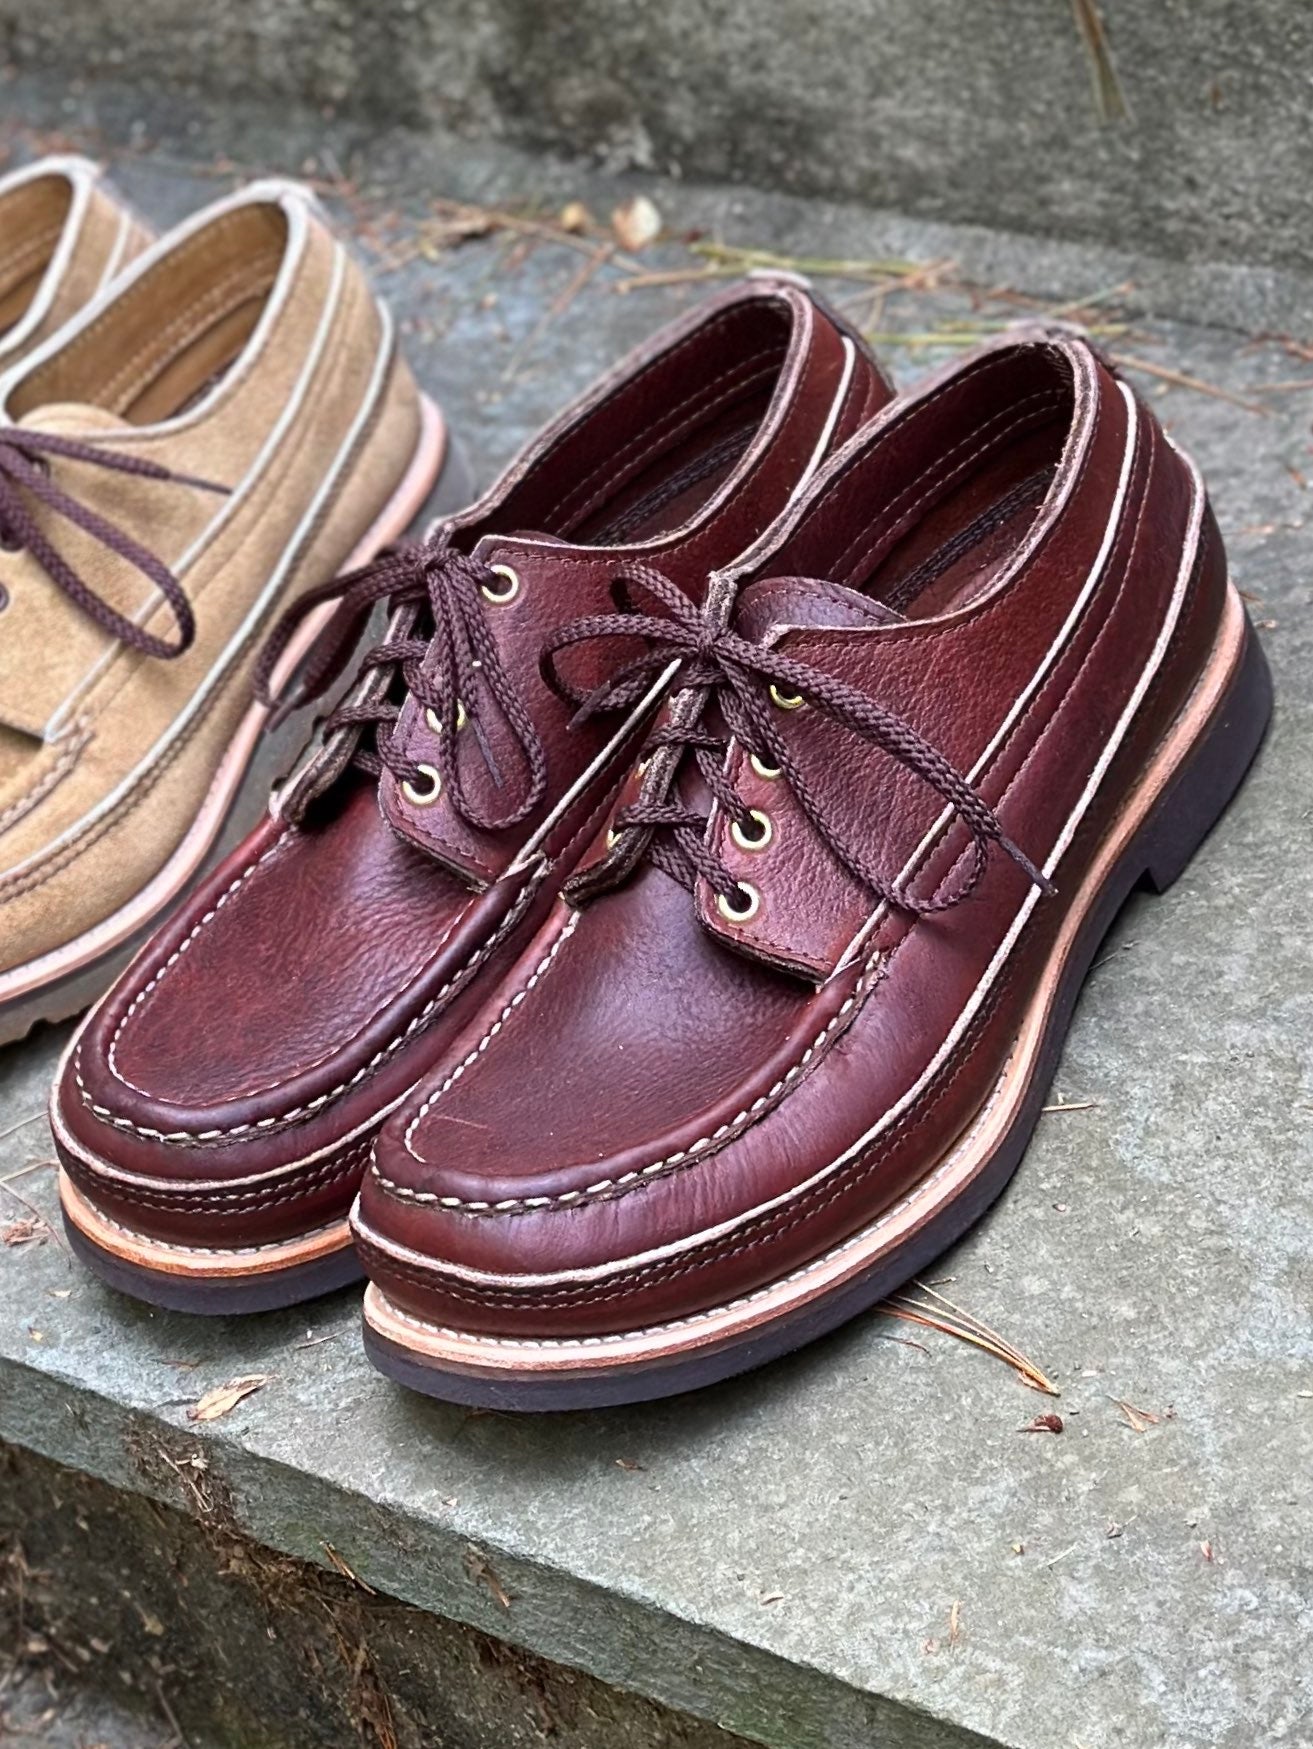 Russell_moccasin_stitchdown_fishing_oxfo